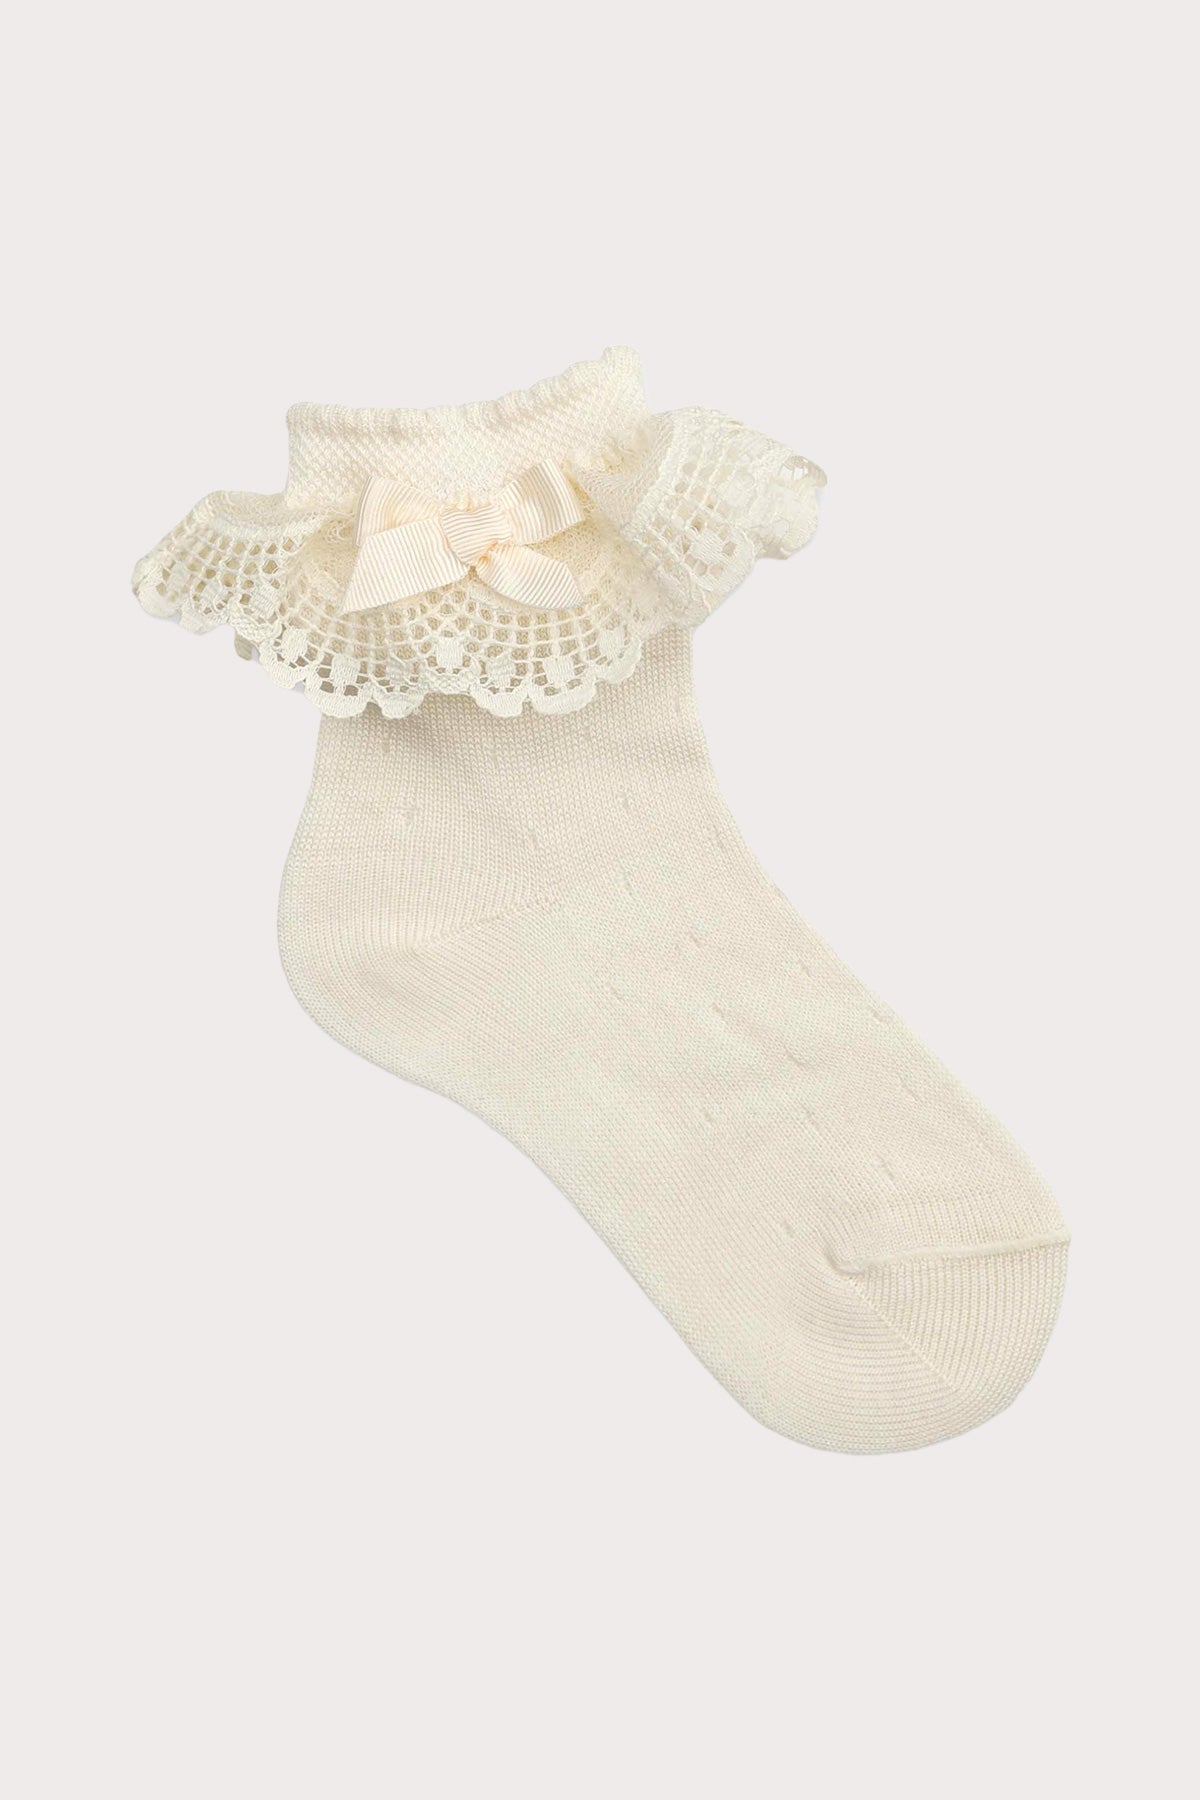 girls lace top ankle socks, made in spain